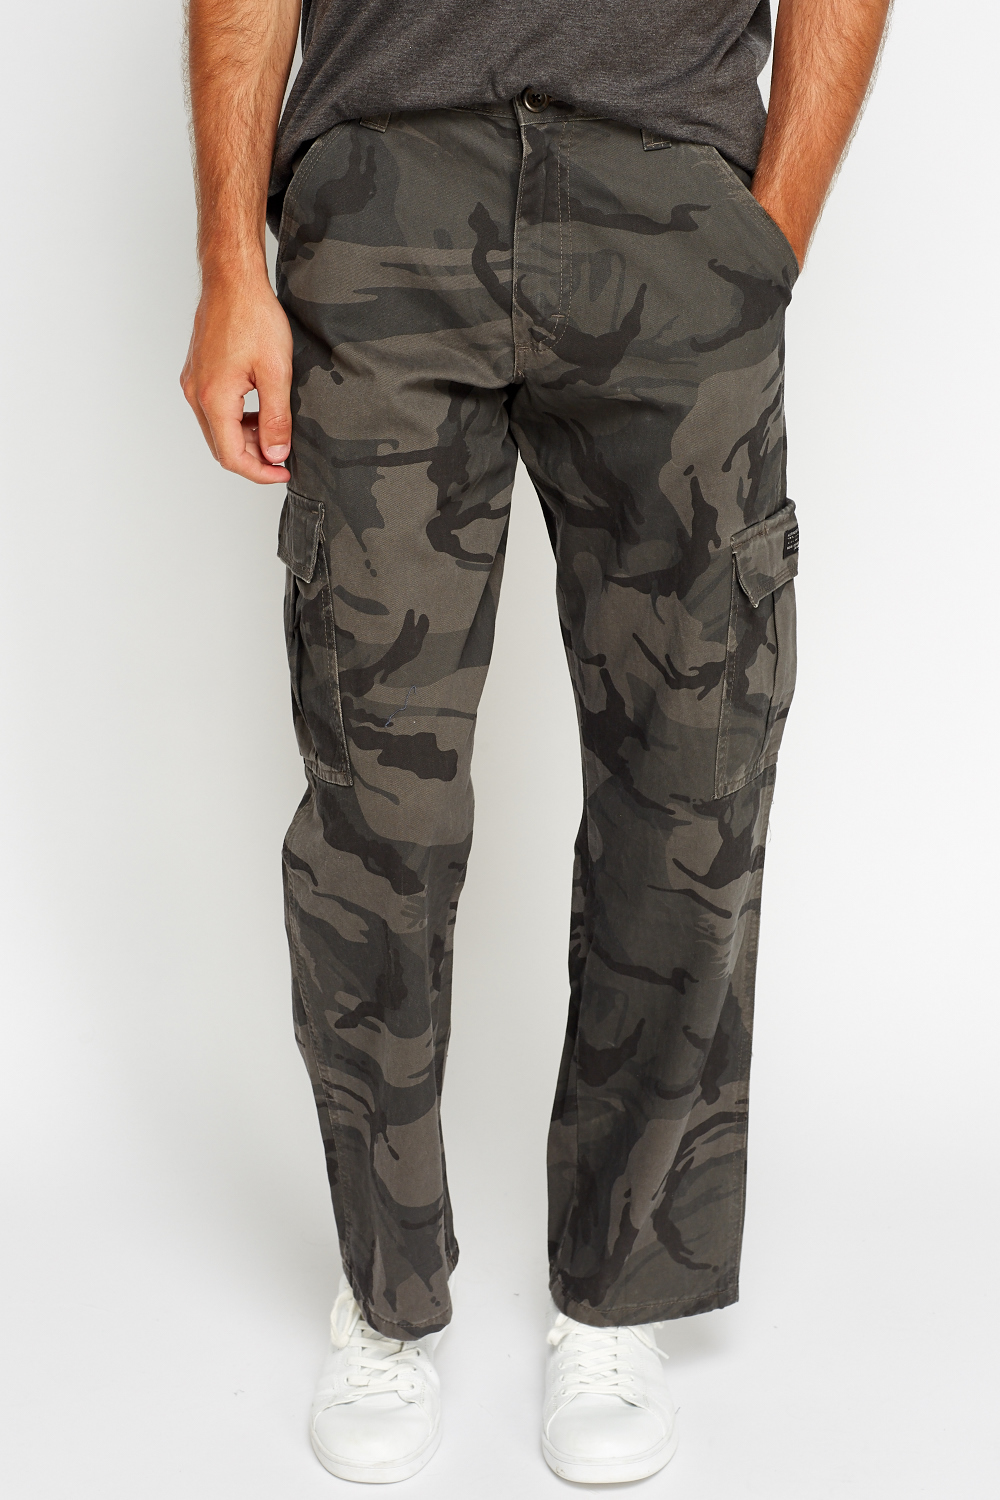 Camouflage Ash Combat Trousers - Just $6